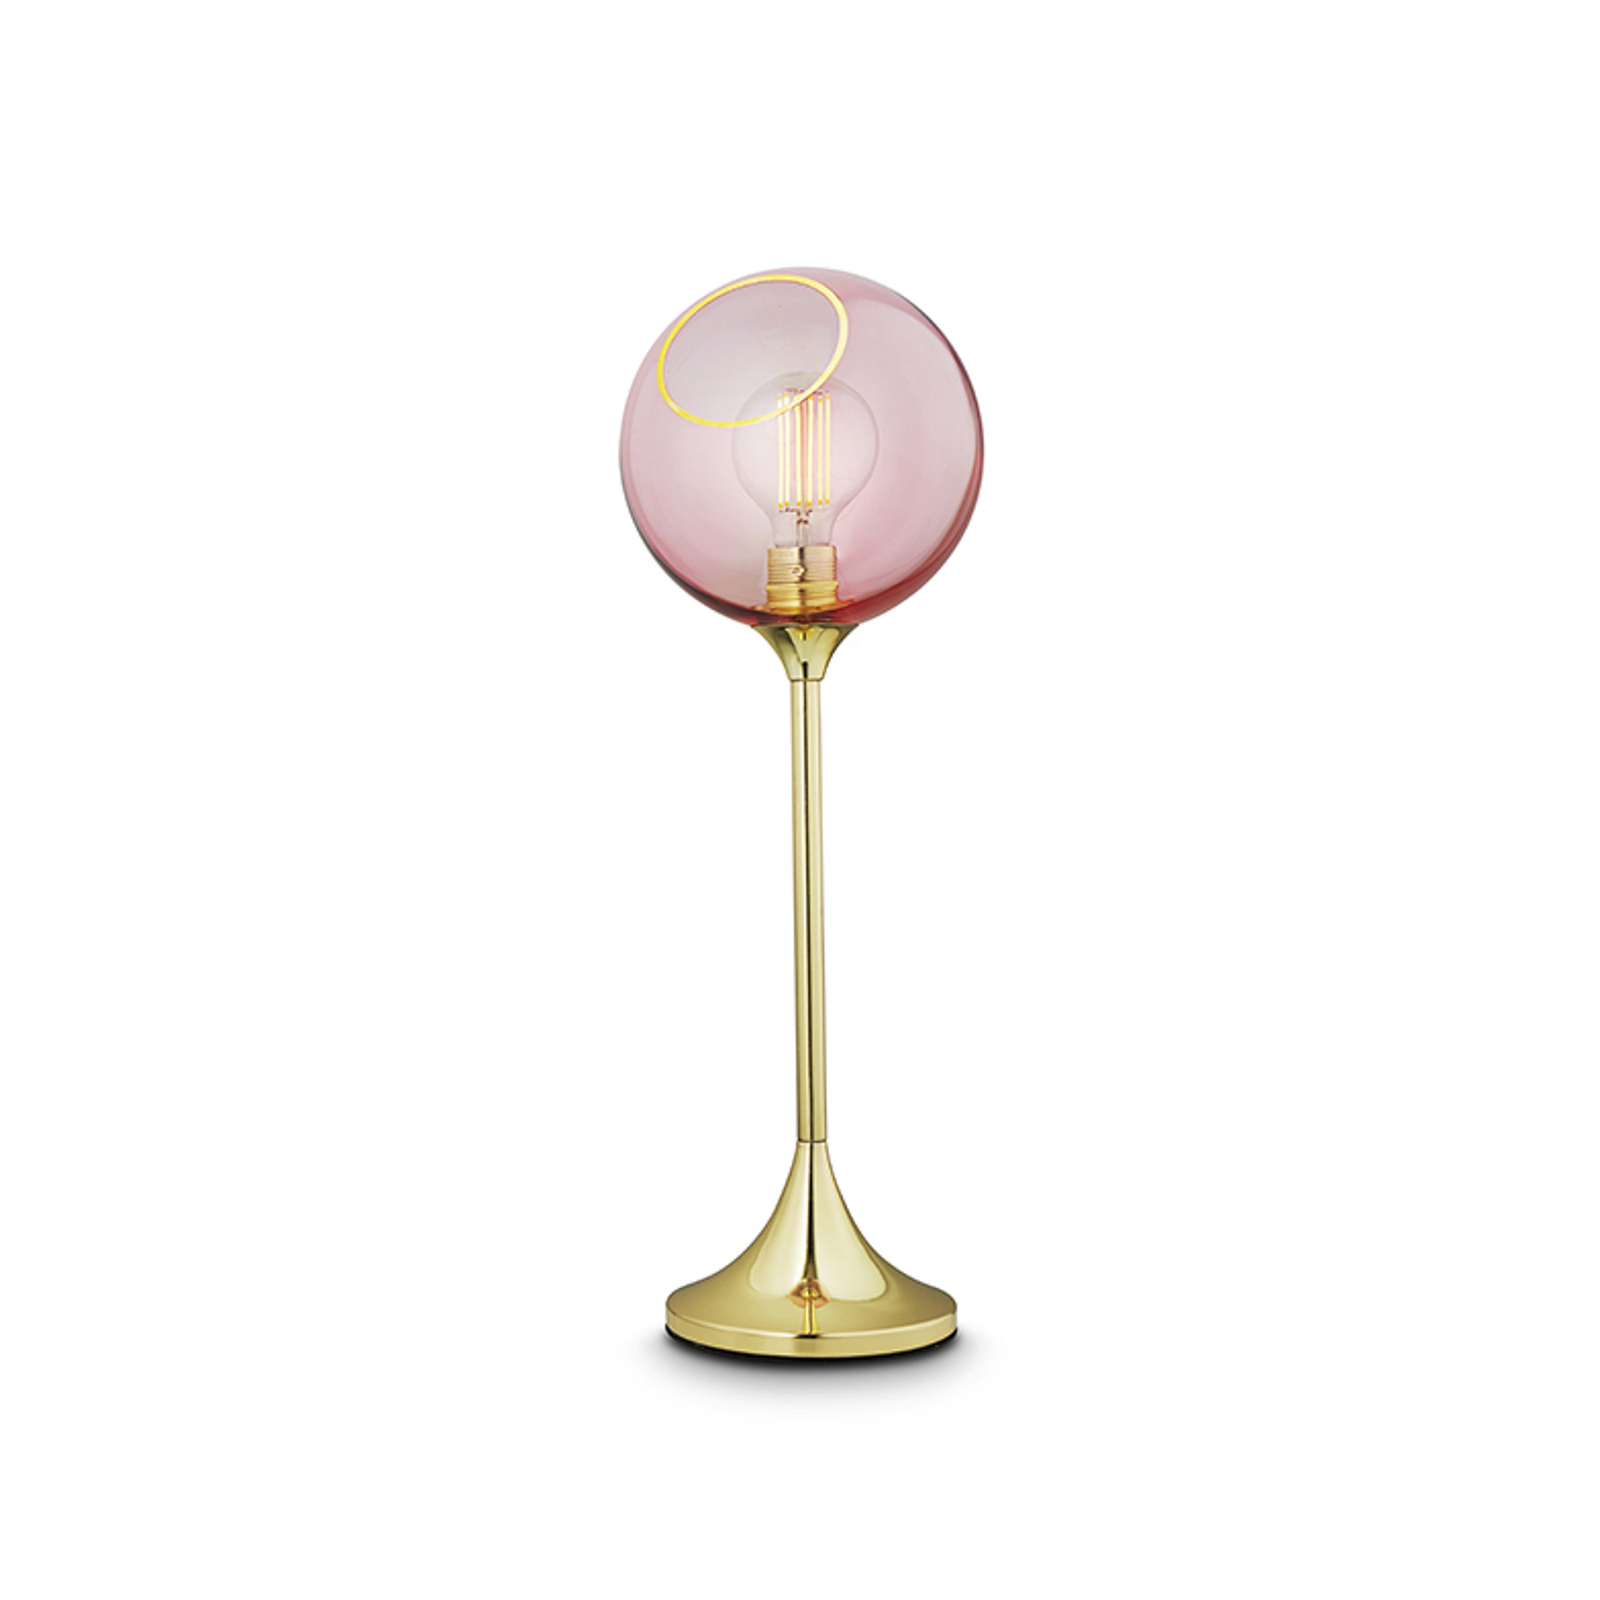 Ballroom table lamp, pink, glass, hand-blown, dimmable